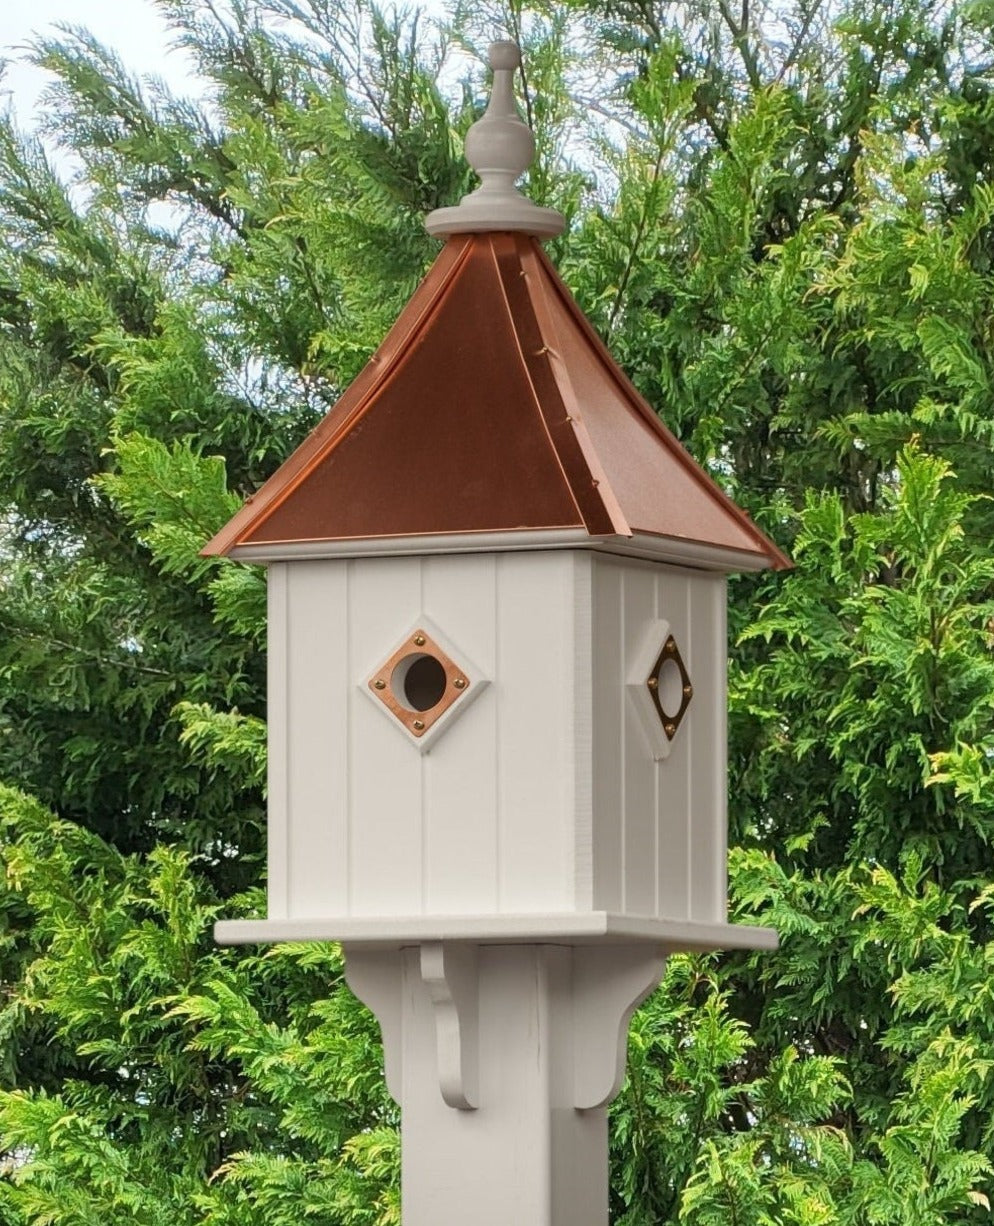 Birdhouse Copper Roof With Copper Predator Guards Handmade Vinyl Large With 4 Nesting Compartments Weather Resistant, Copper Top Birdhouse